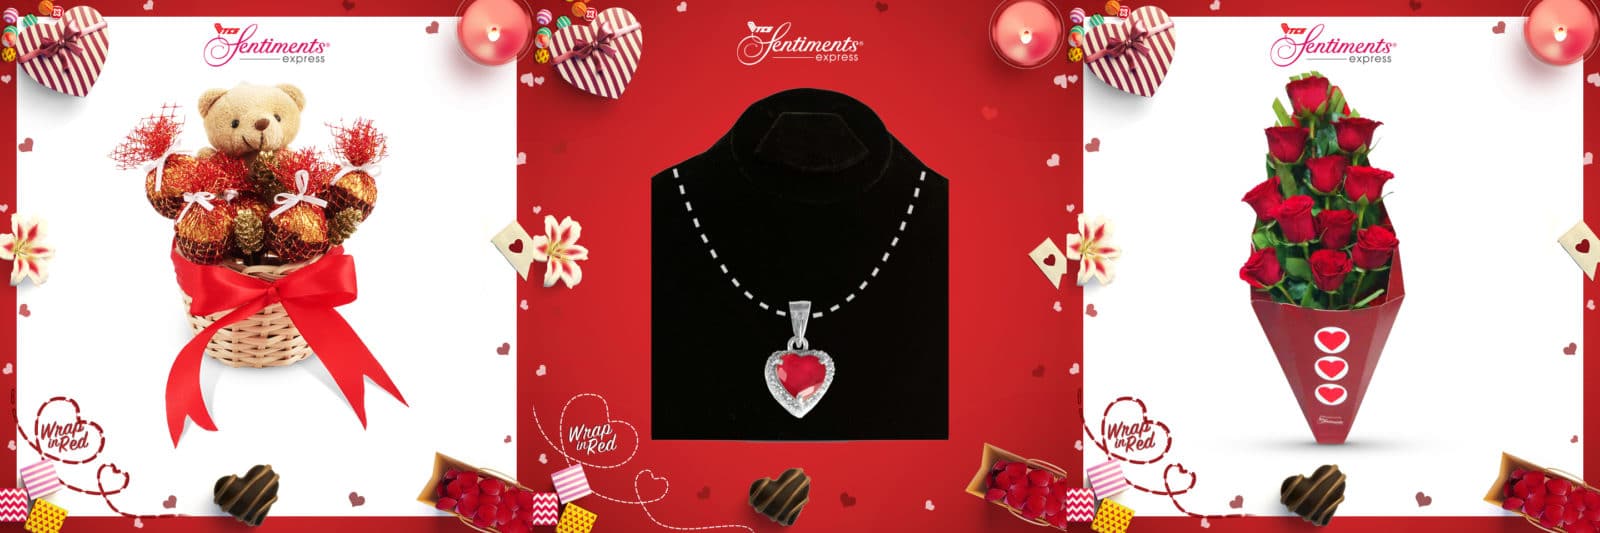 Celebrate Valentine's Day With New Offers from TCS Sentiments Express